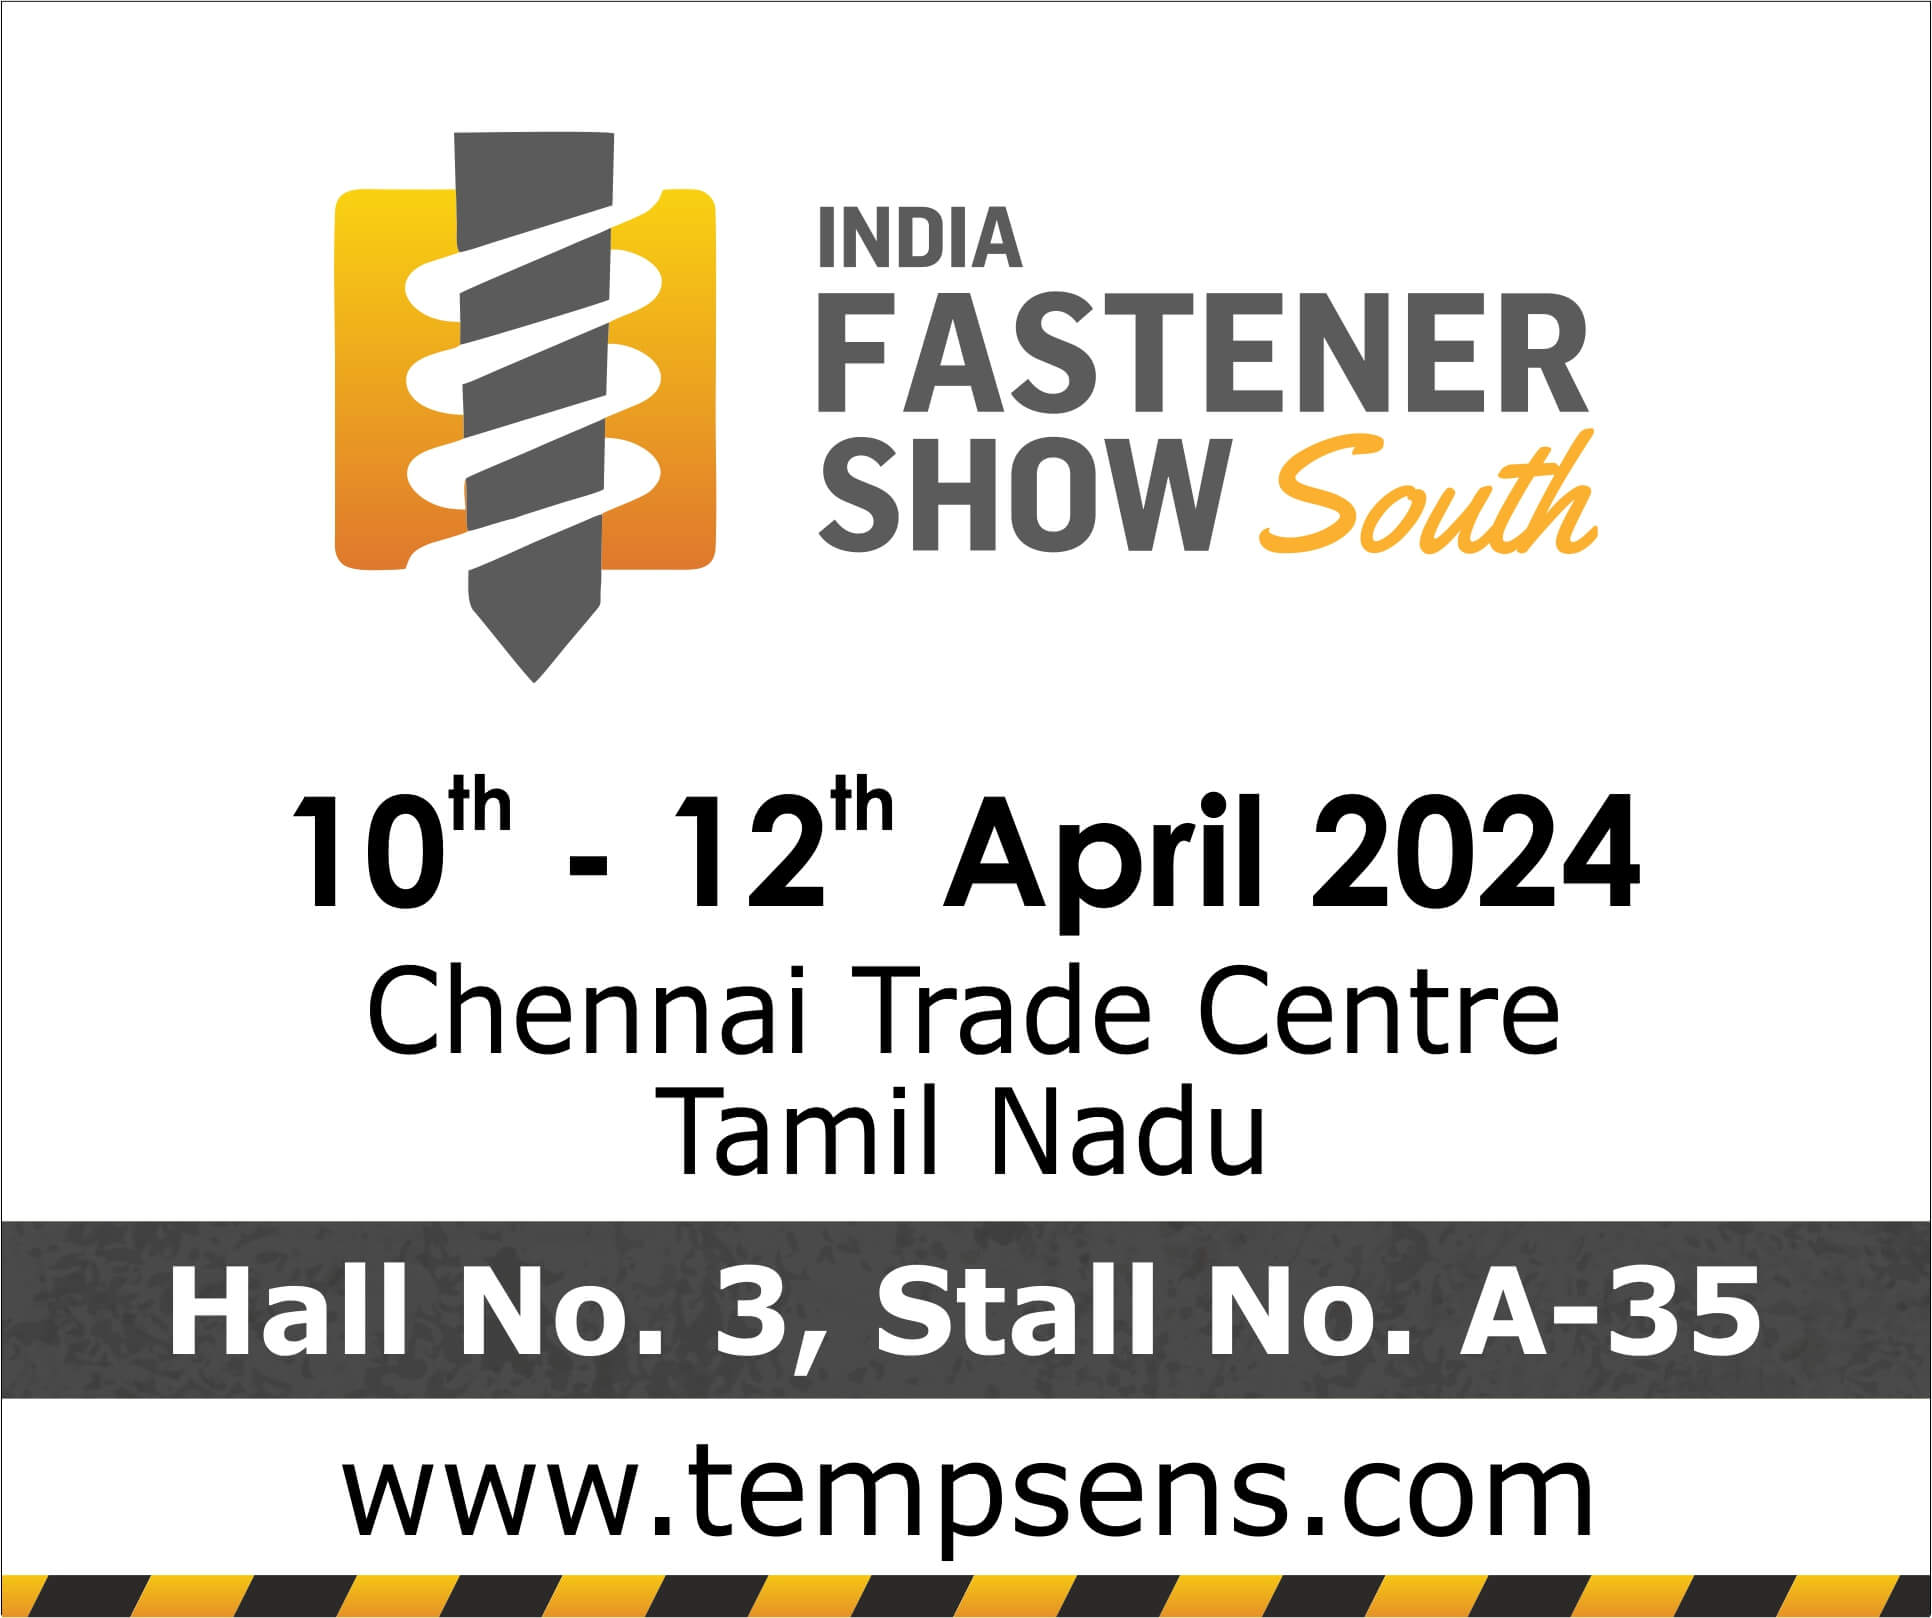 India Fastener Show South 2024